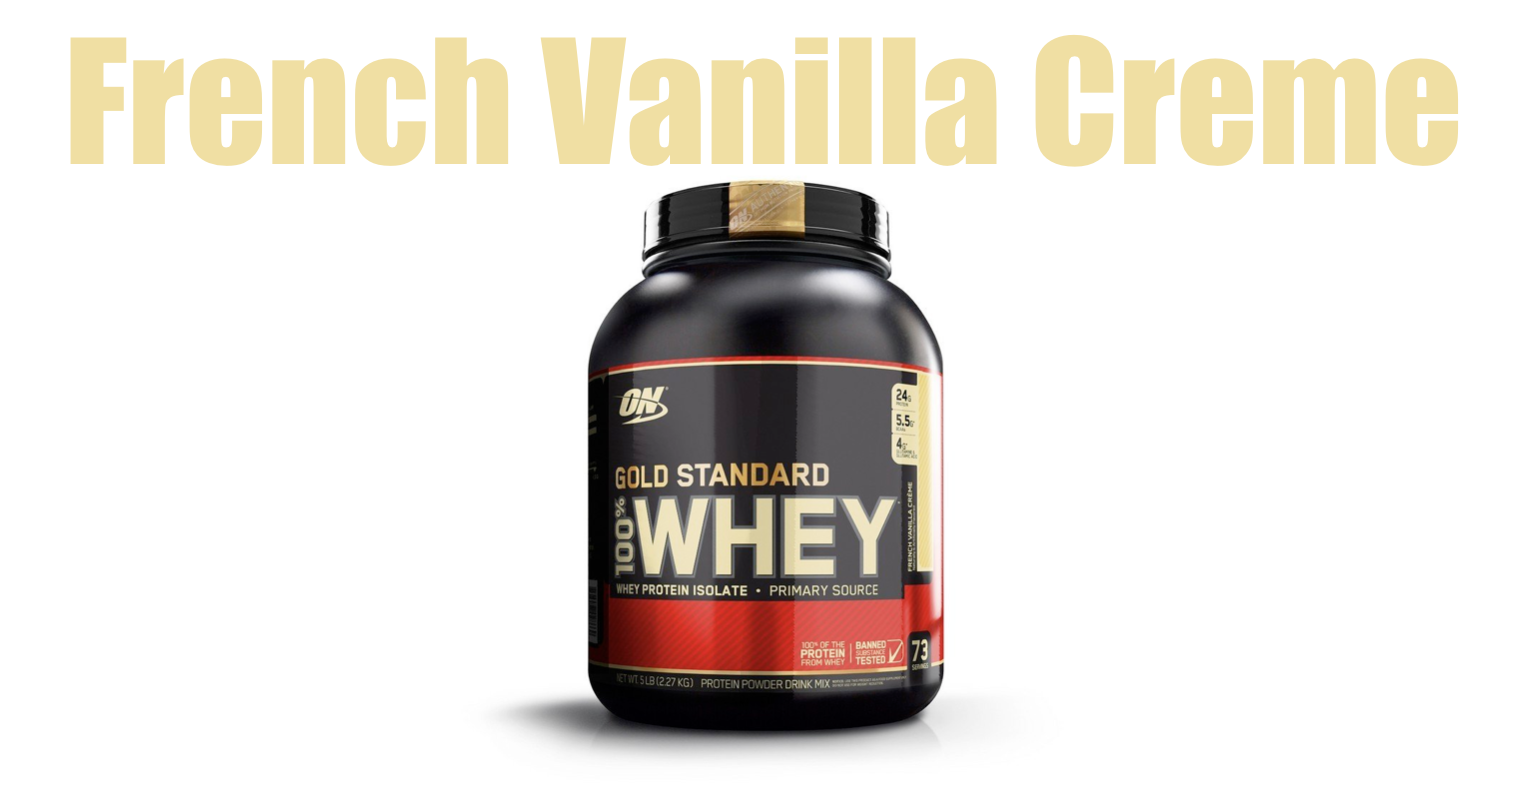 Optimum Nutrition FRENCH VANILLA CREME Review (With ...